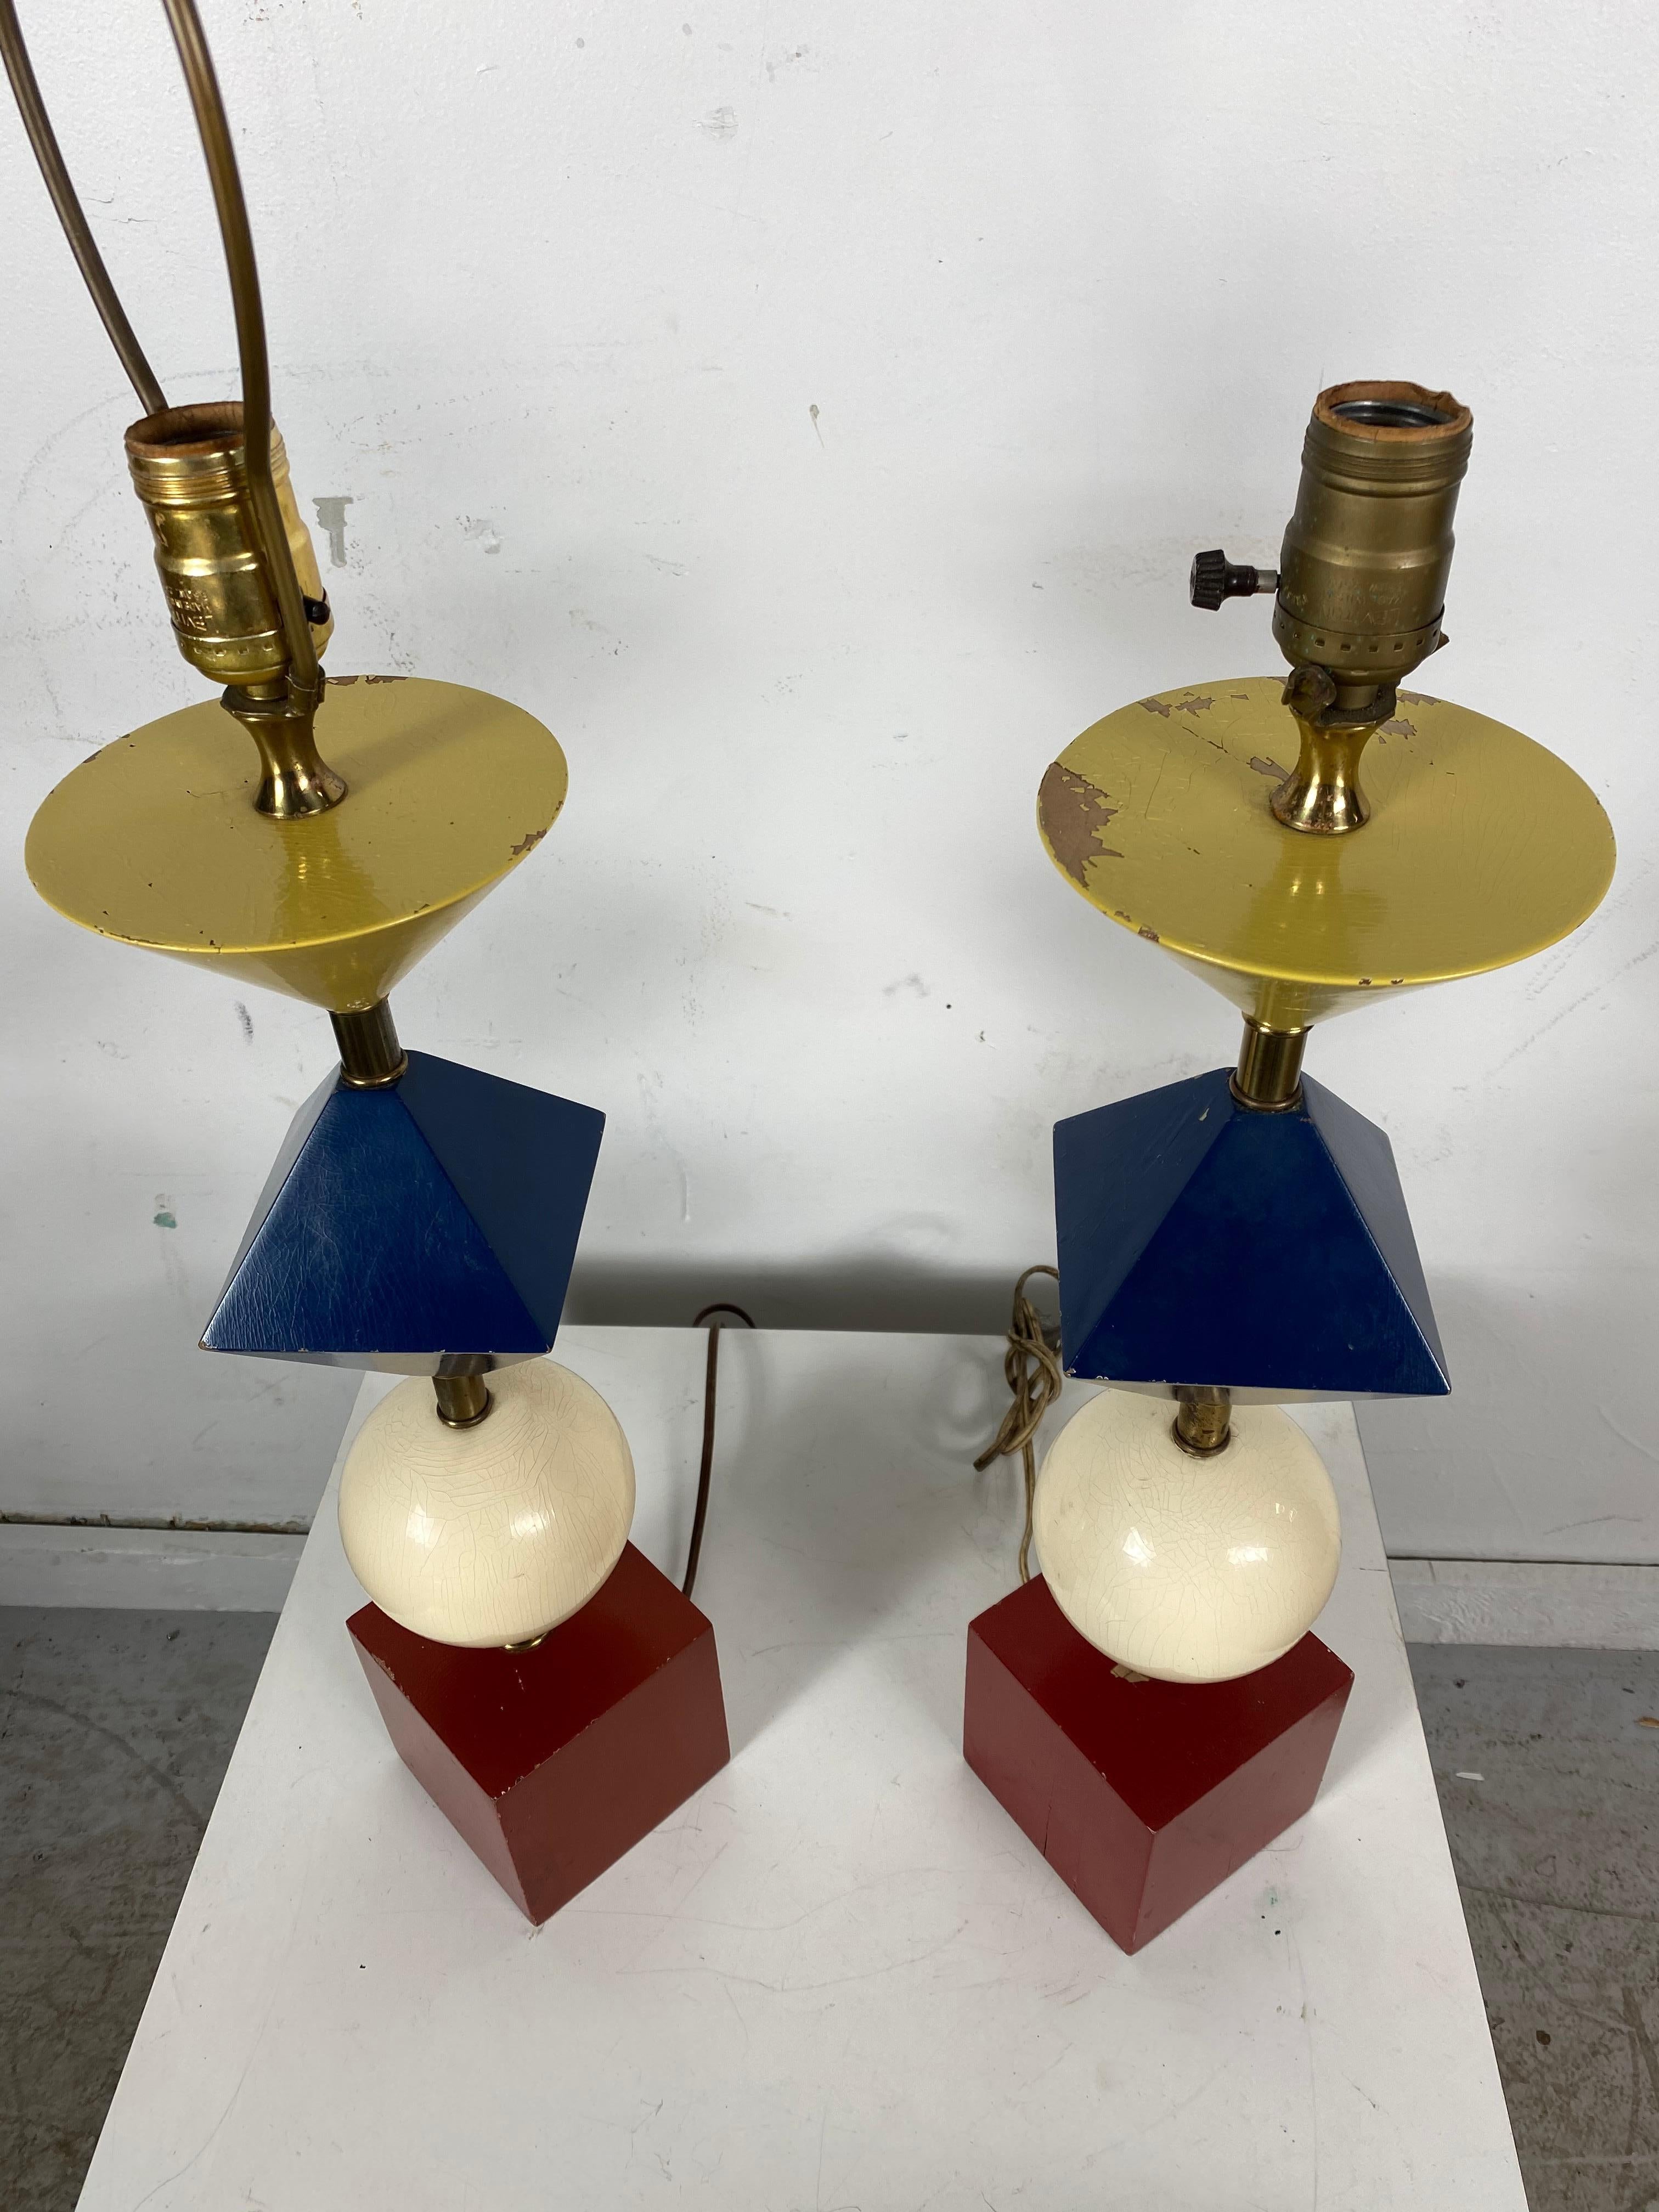 American Rare Pair of Gerald Thurston, Lightolier Table Lamps, Painted Wood Shapes